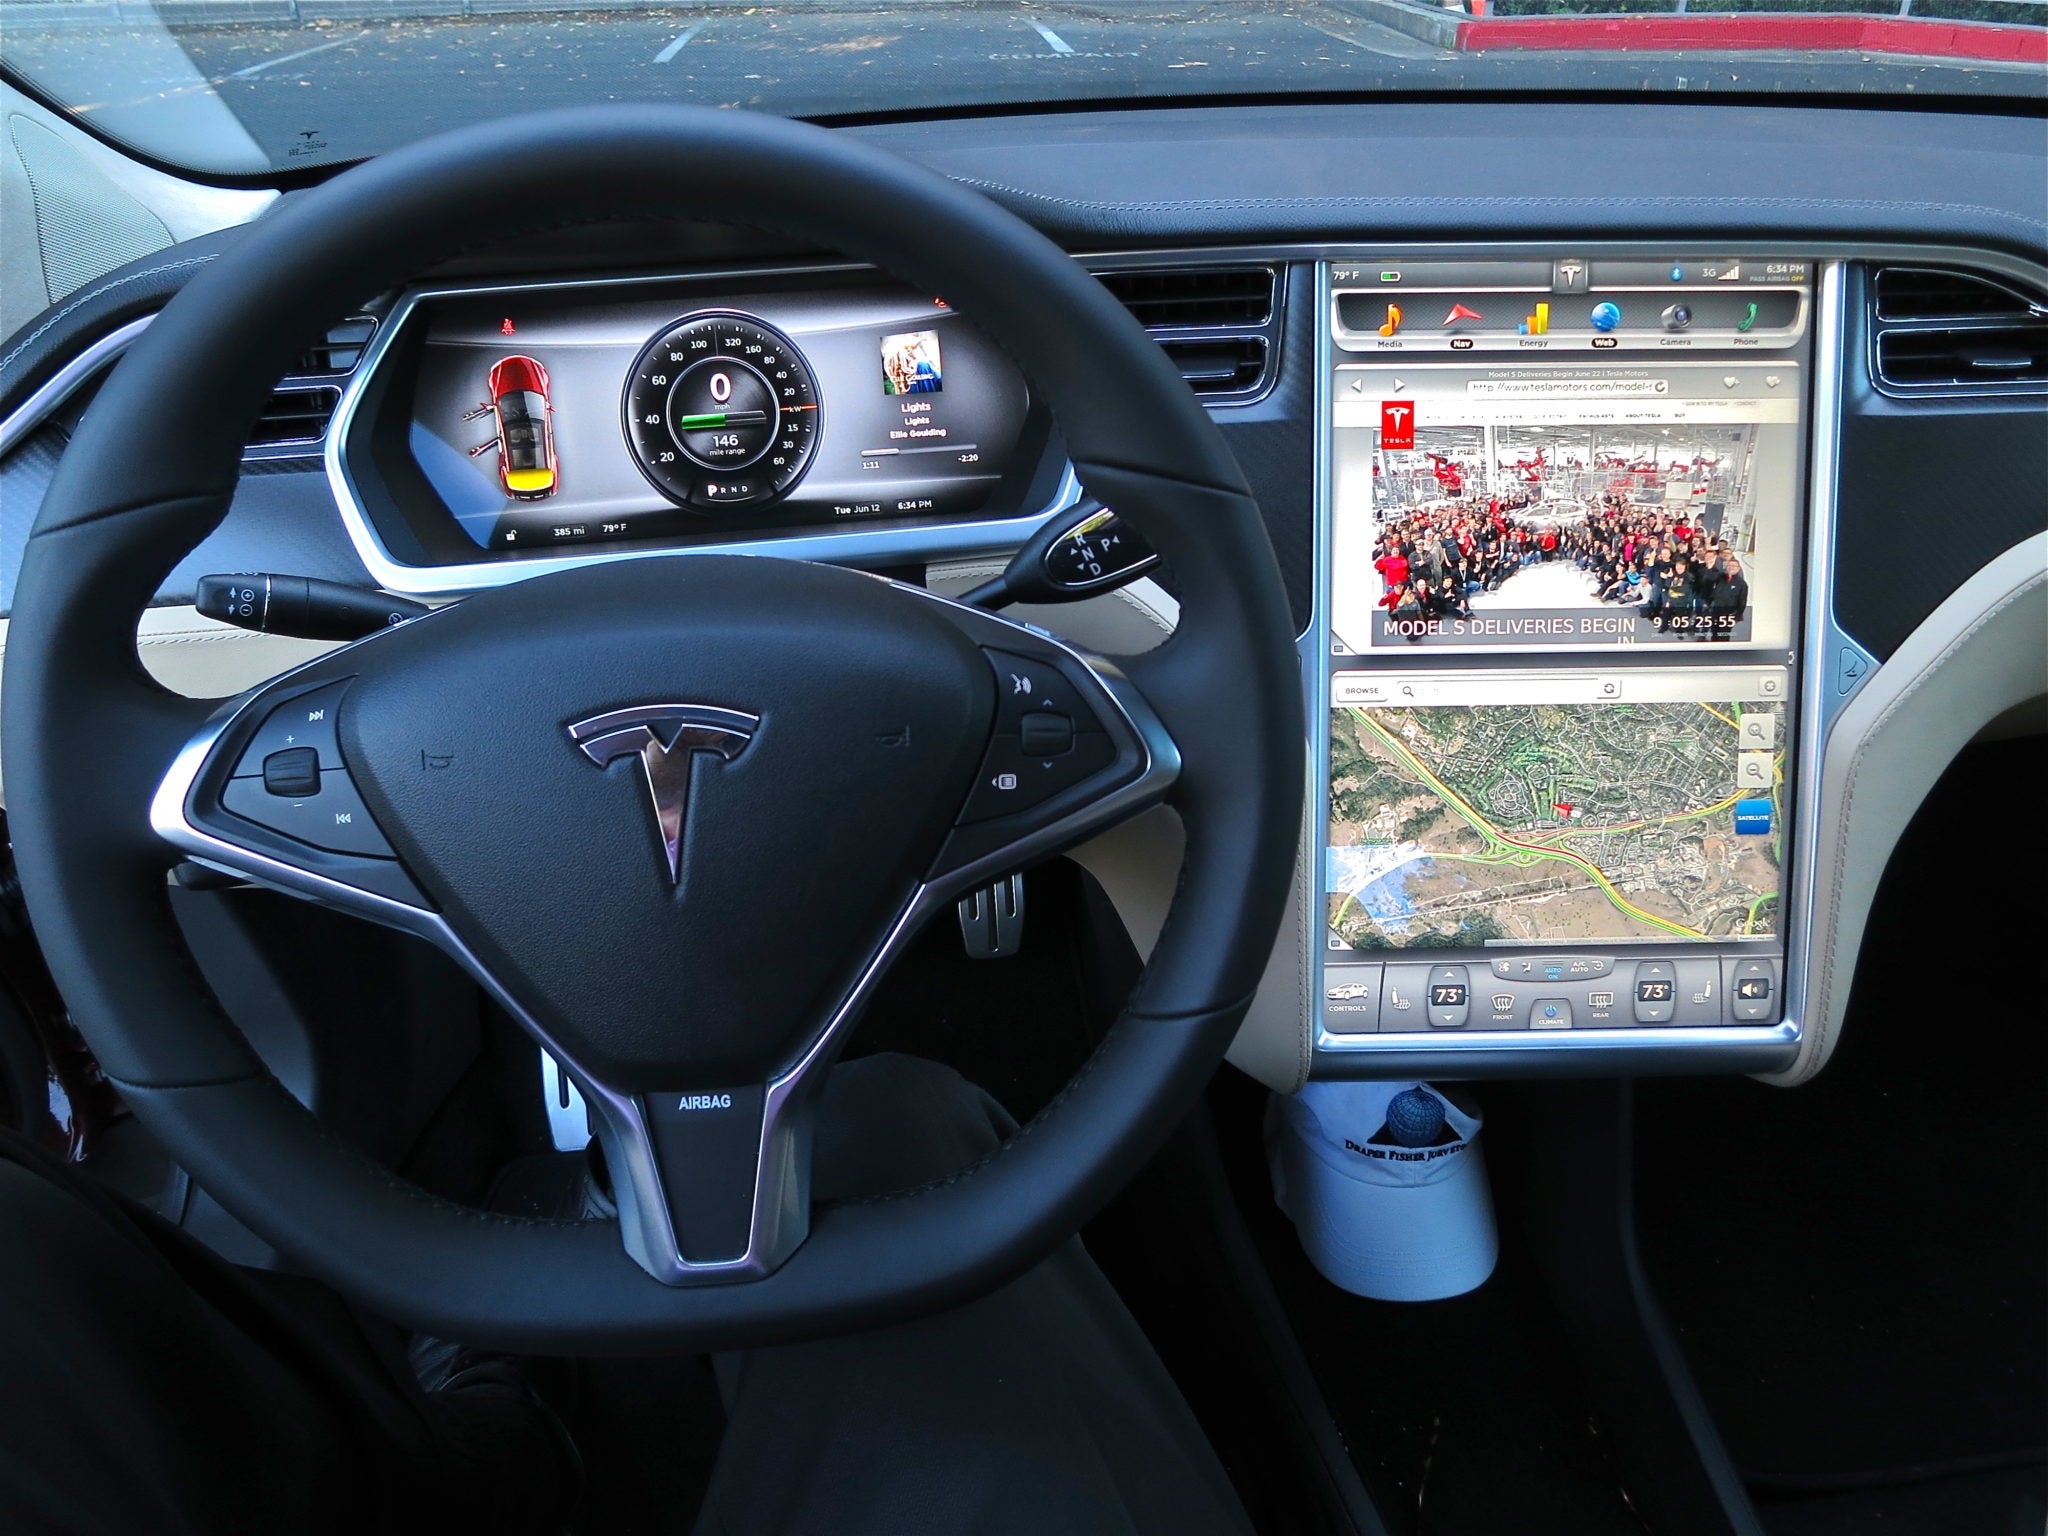 Tesla, AMD & the AI chip that could soon be controlling your car